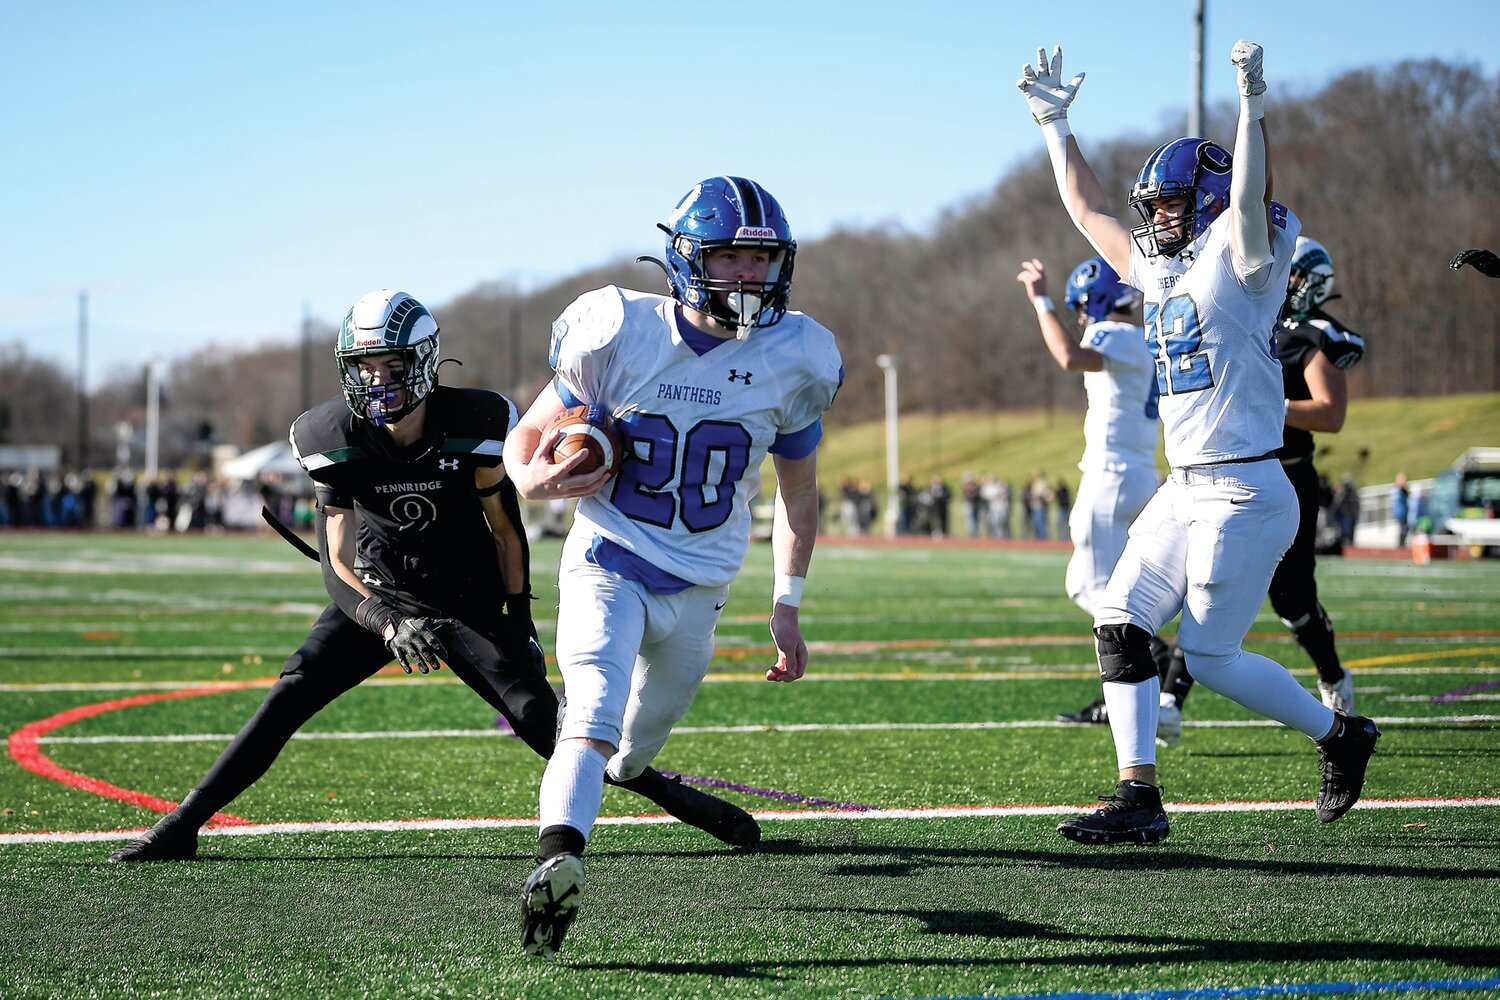 Quakertown’s Gavin Carroll runs in untouched and scores the first points of the game in the first quarter.